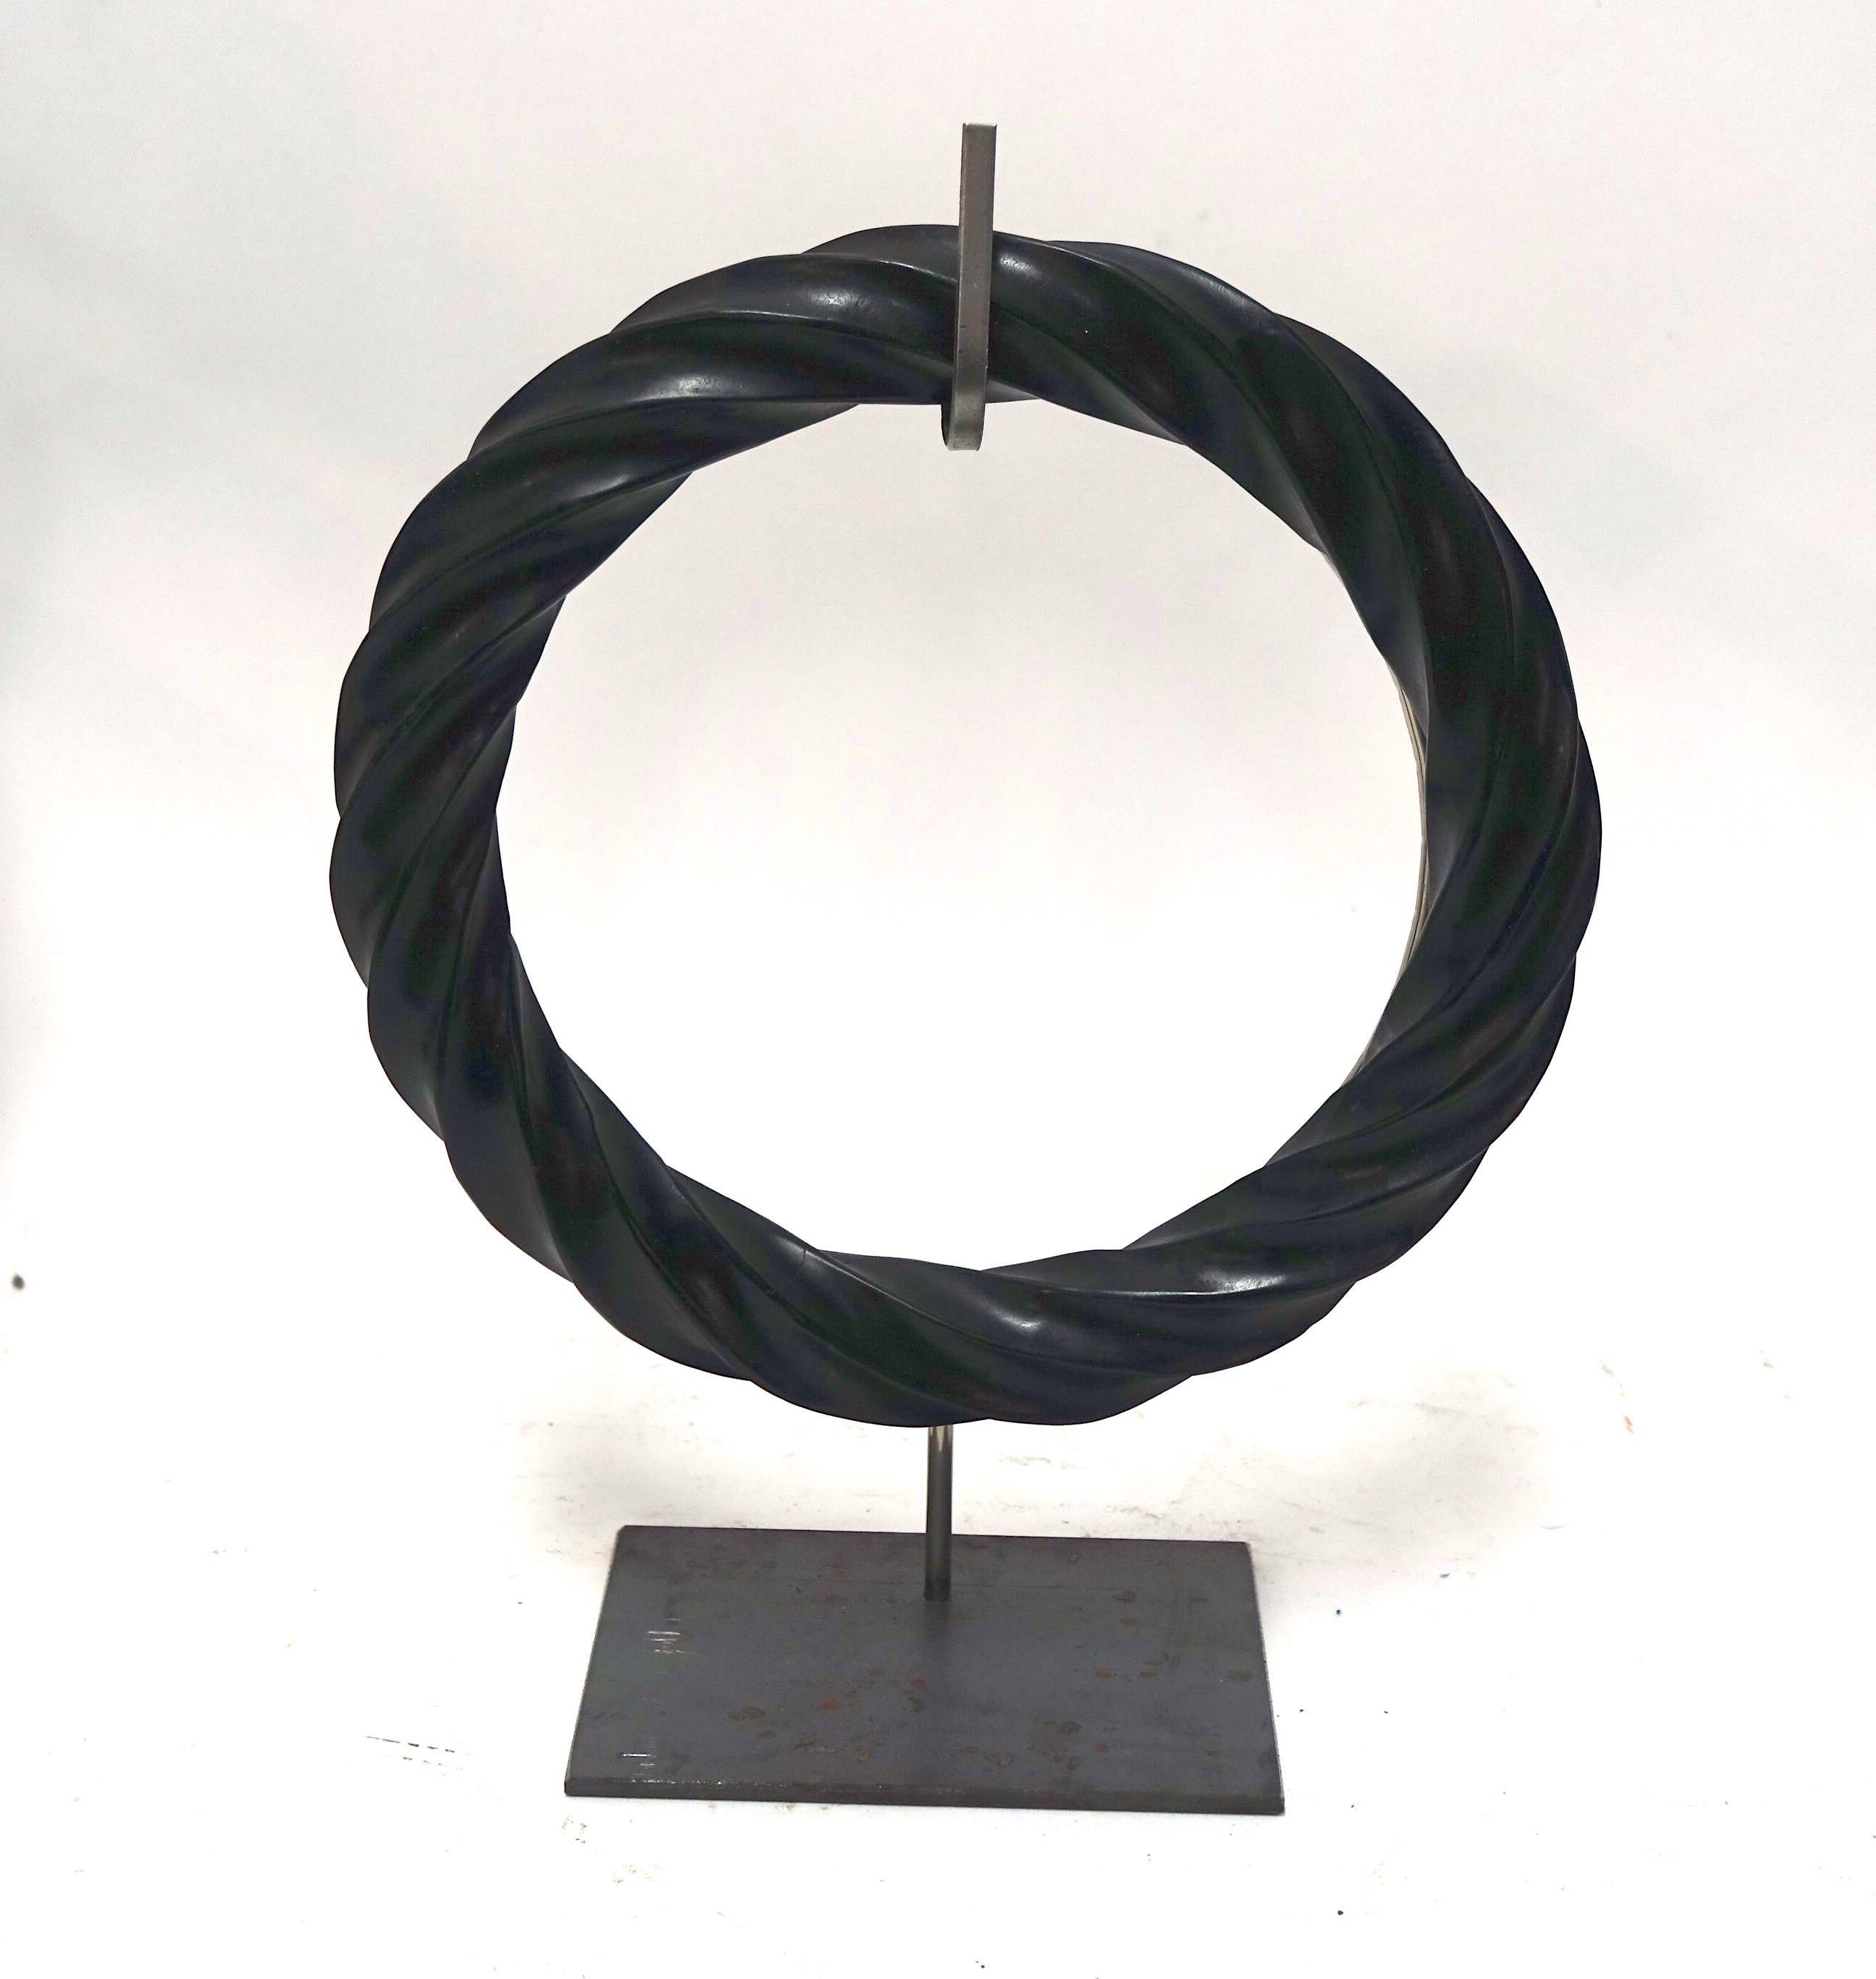 Contemporary Chinese pair of black twisted marble rings on steel stands.
Honed finish.
10